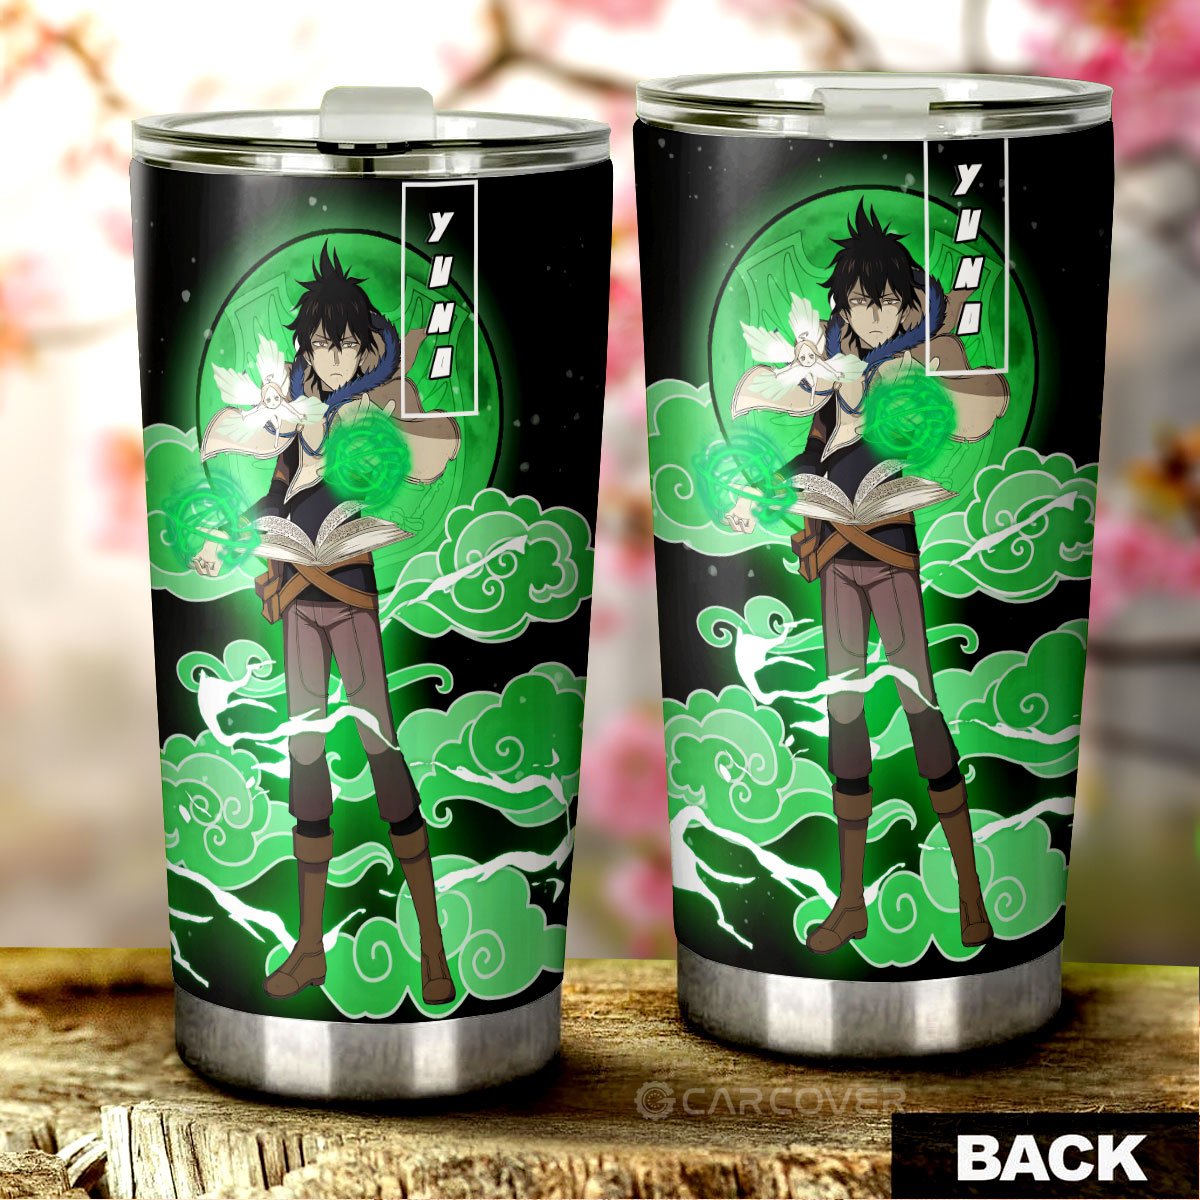 Yuno Tumbler Cup Custom Car Accessories - Gearcarcover - 3